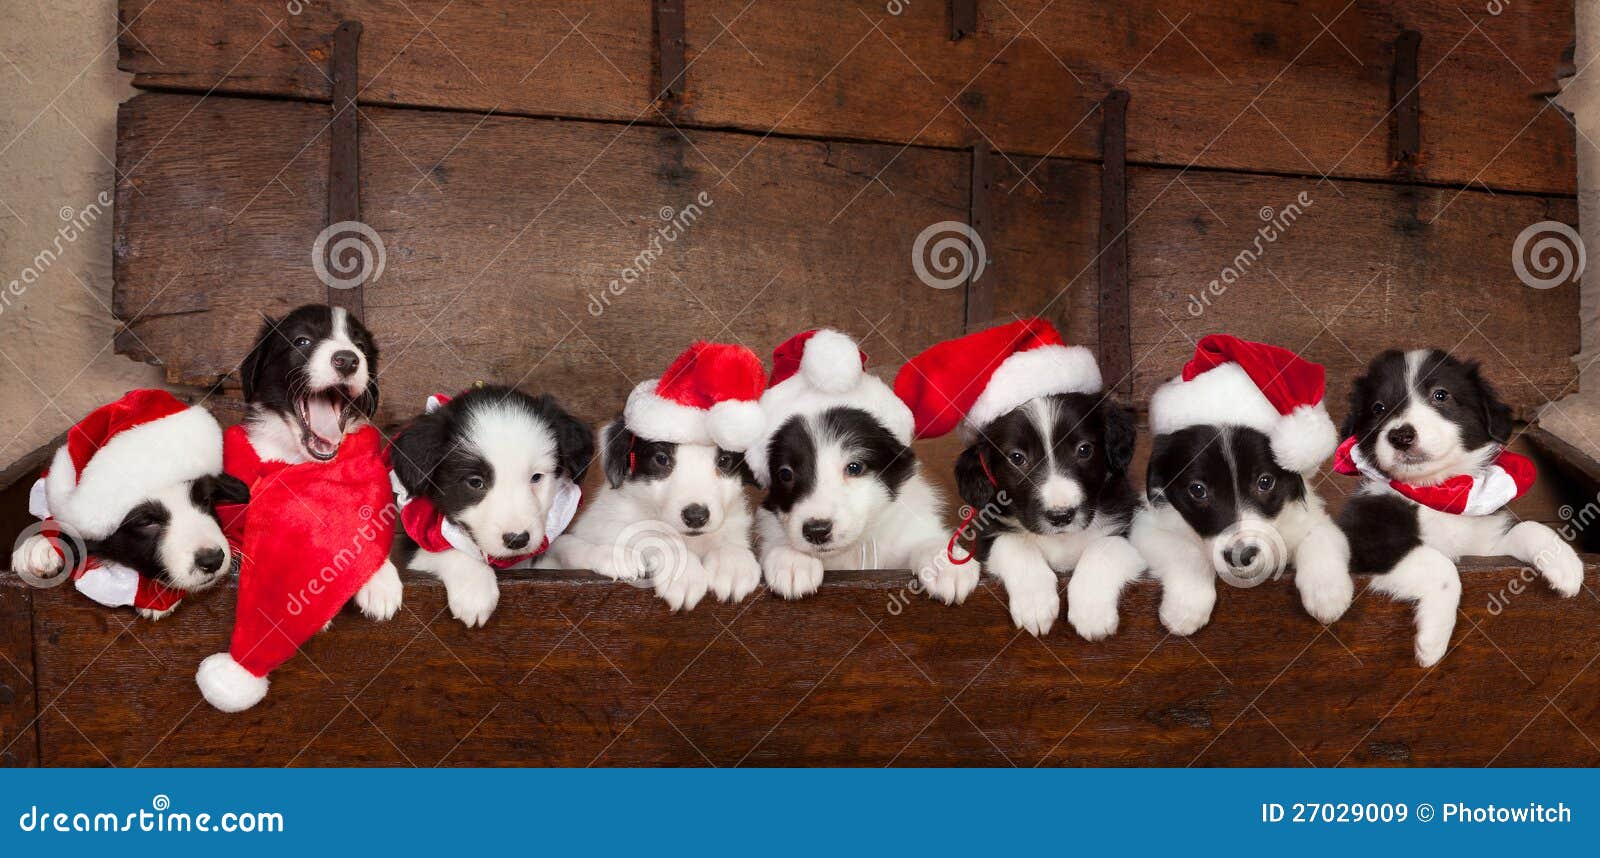 Eight Christmas Puppies Royalty Free Stock Images Image